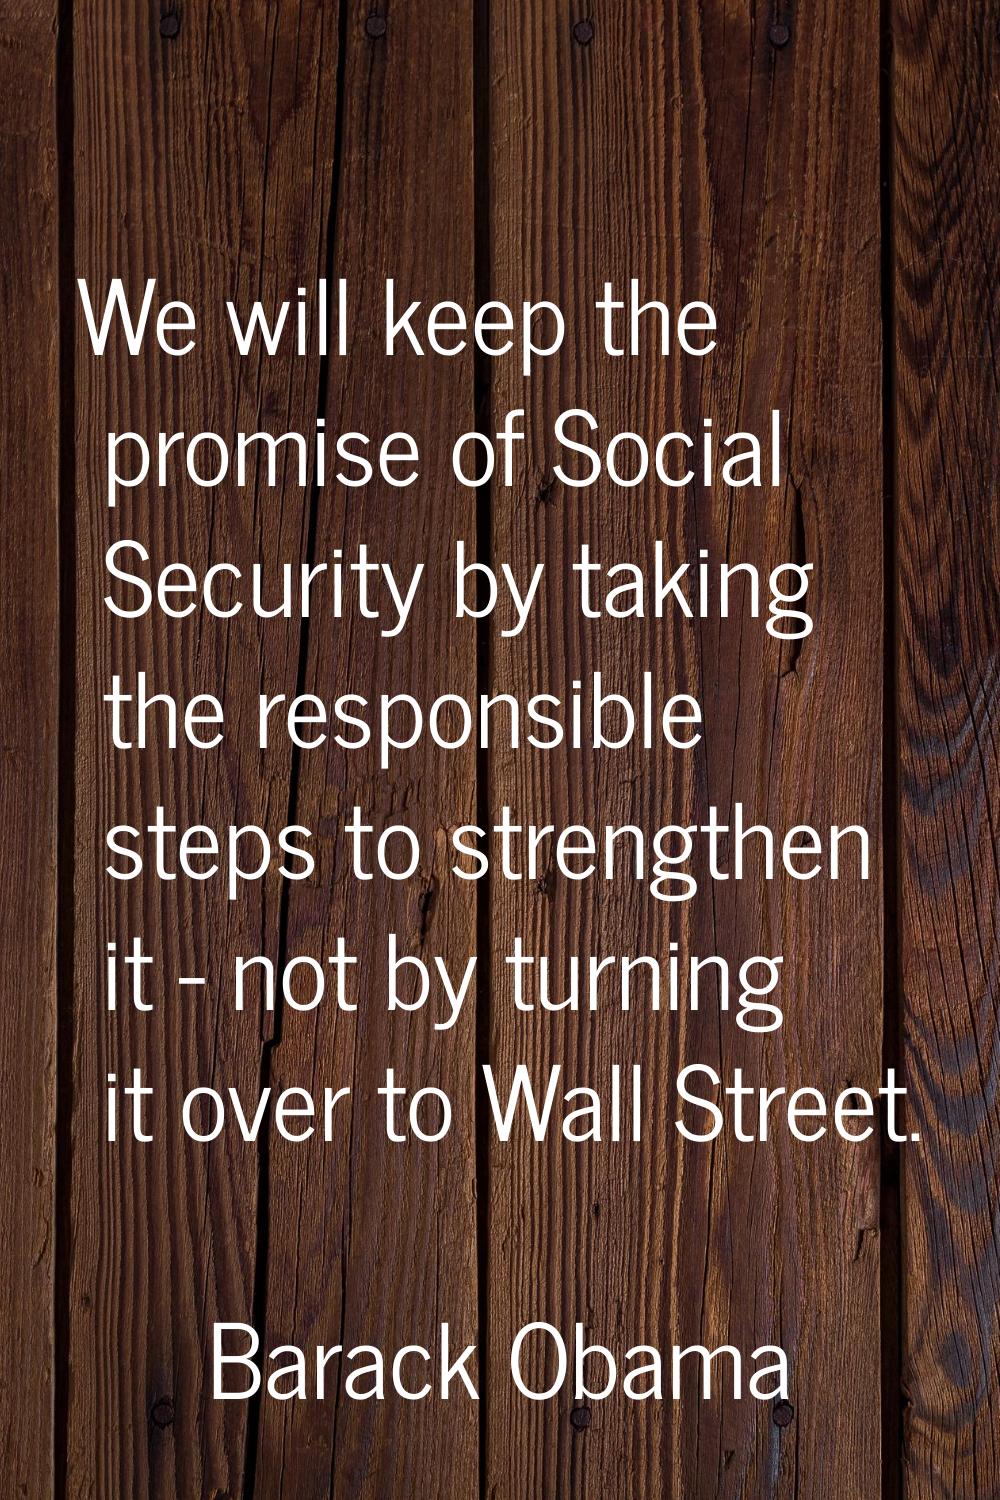 We will keep the promise of Social Security by taking the responsible steps to strengthen it - not 